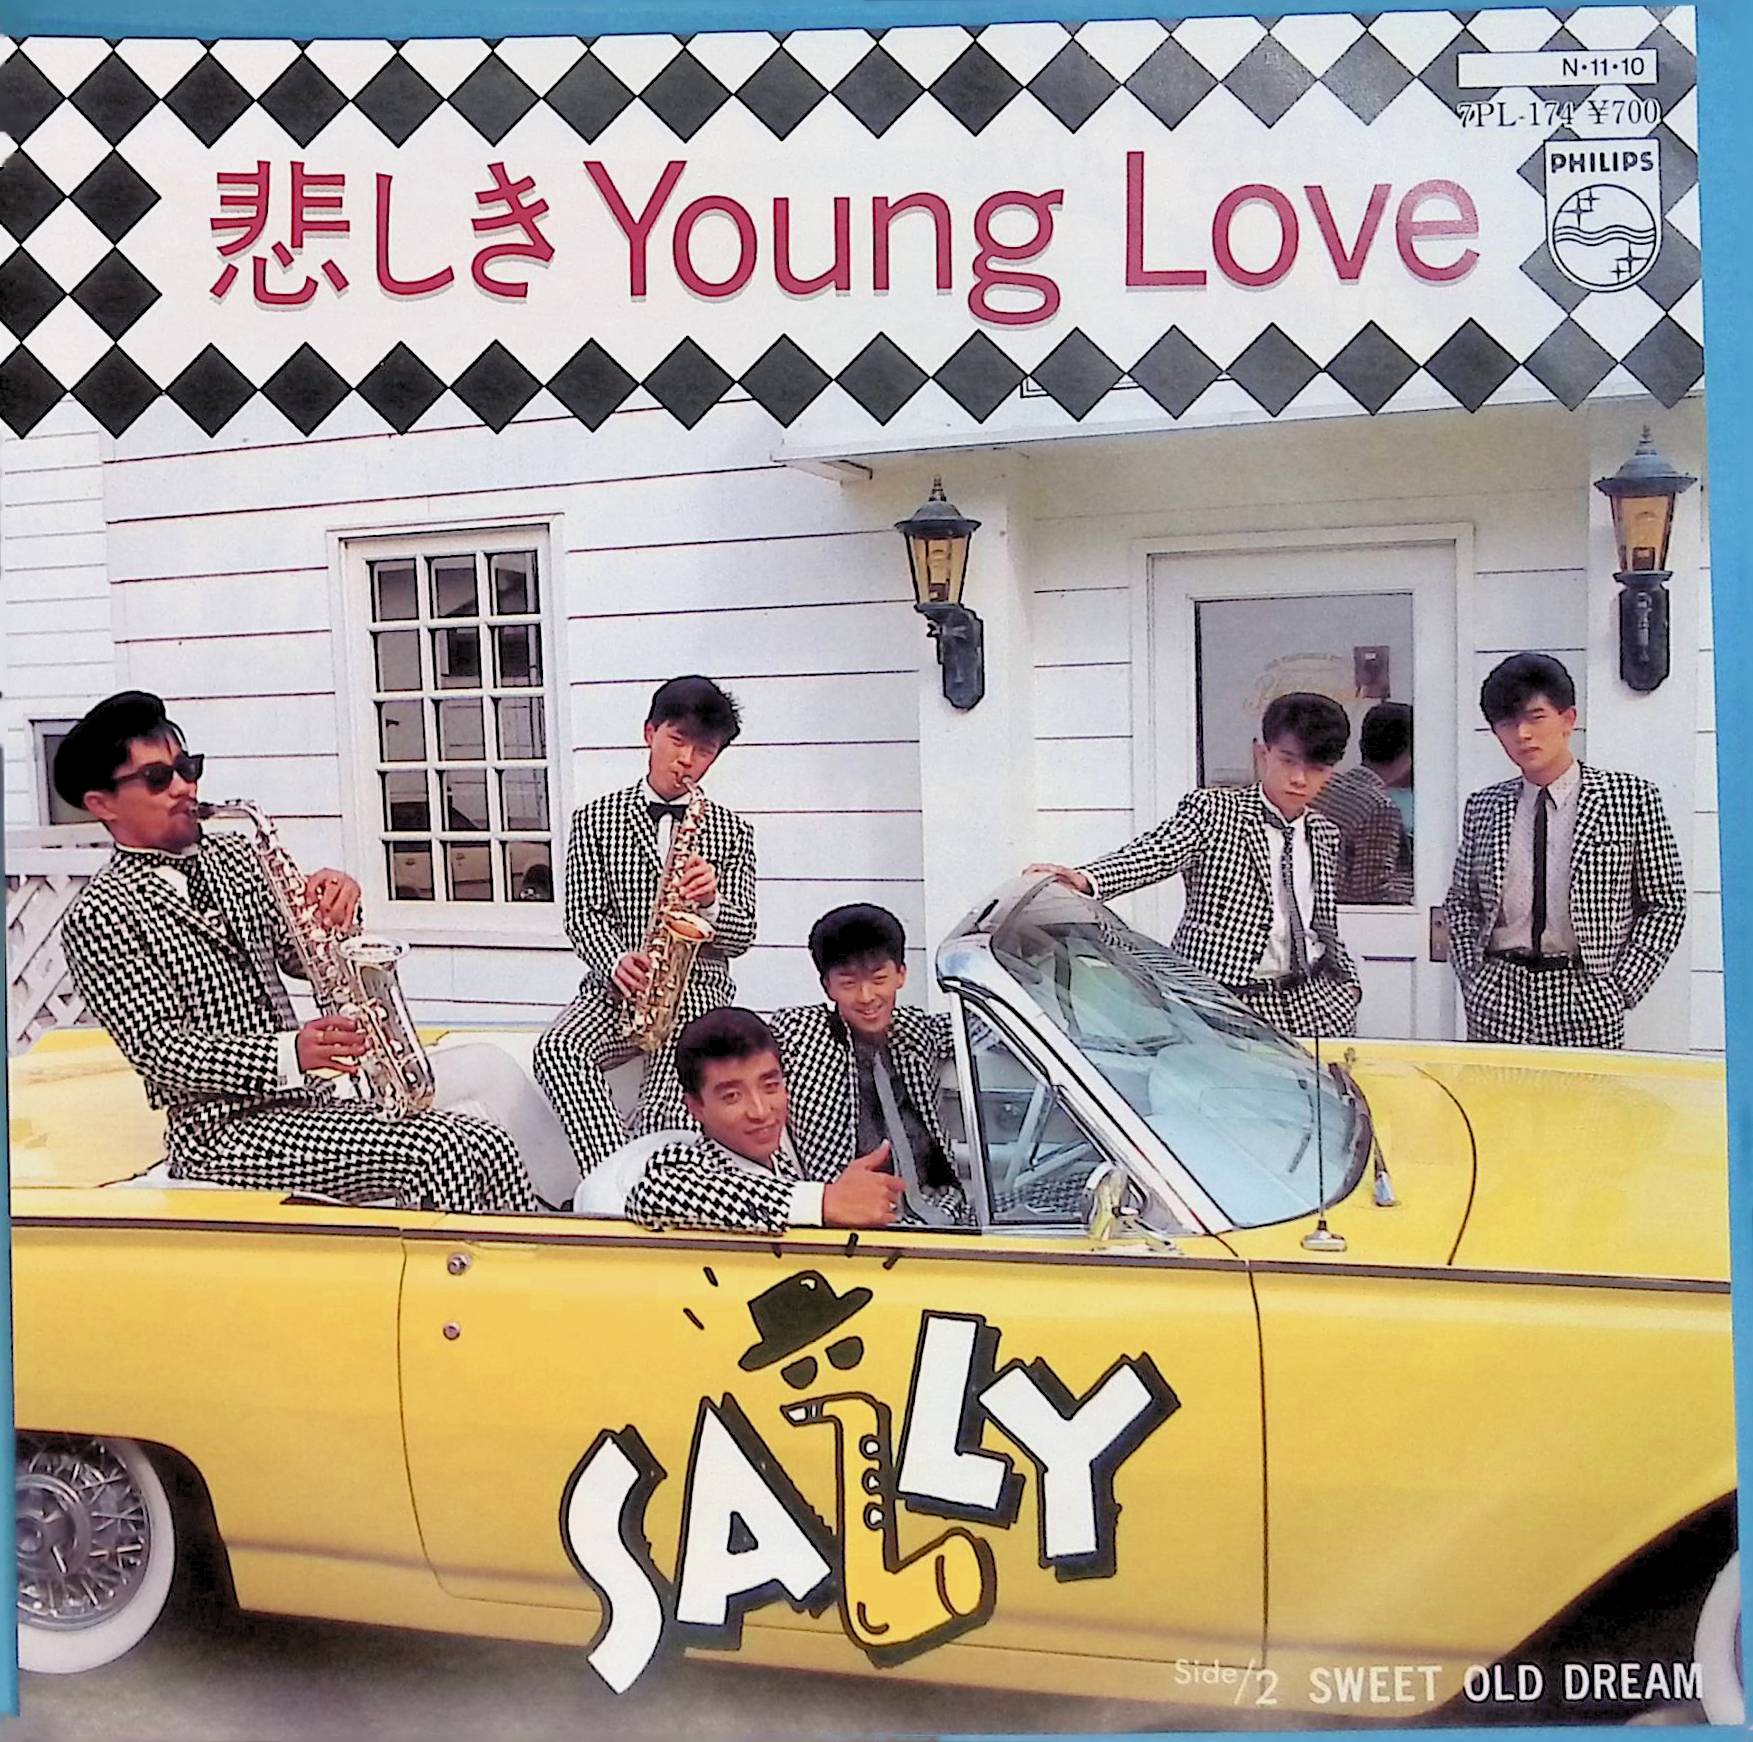 Sally   悲しき Young Love / Sweet Old Dream  (7PL-174)